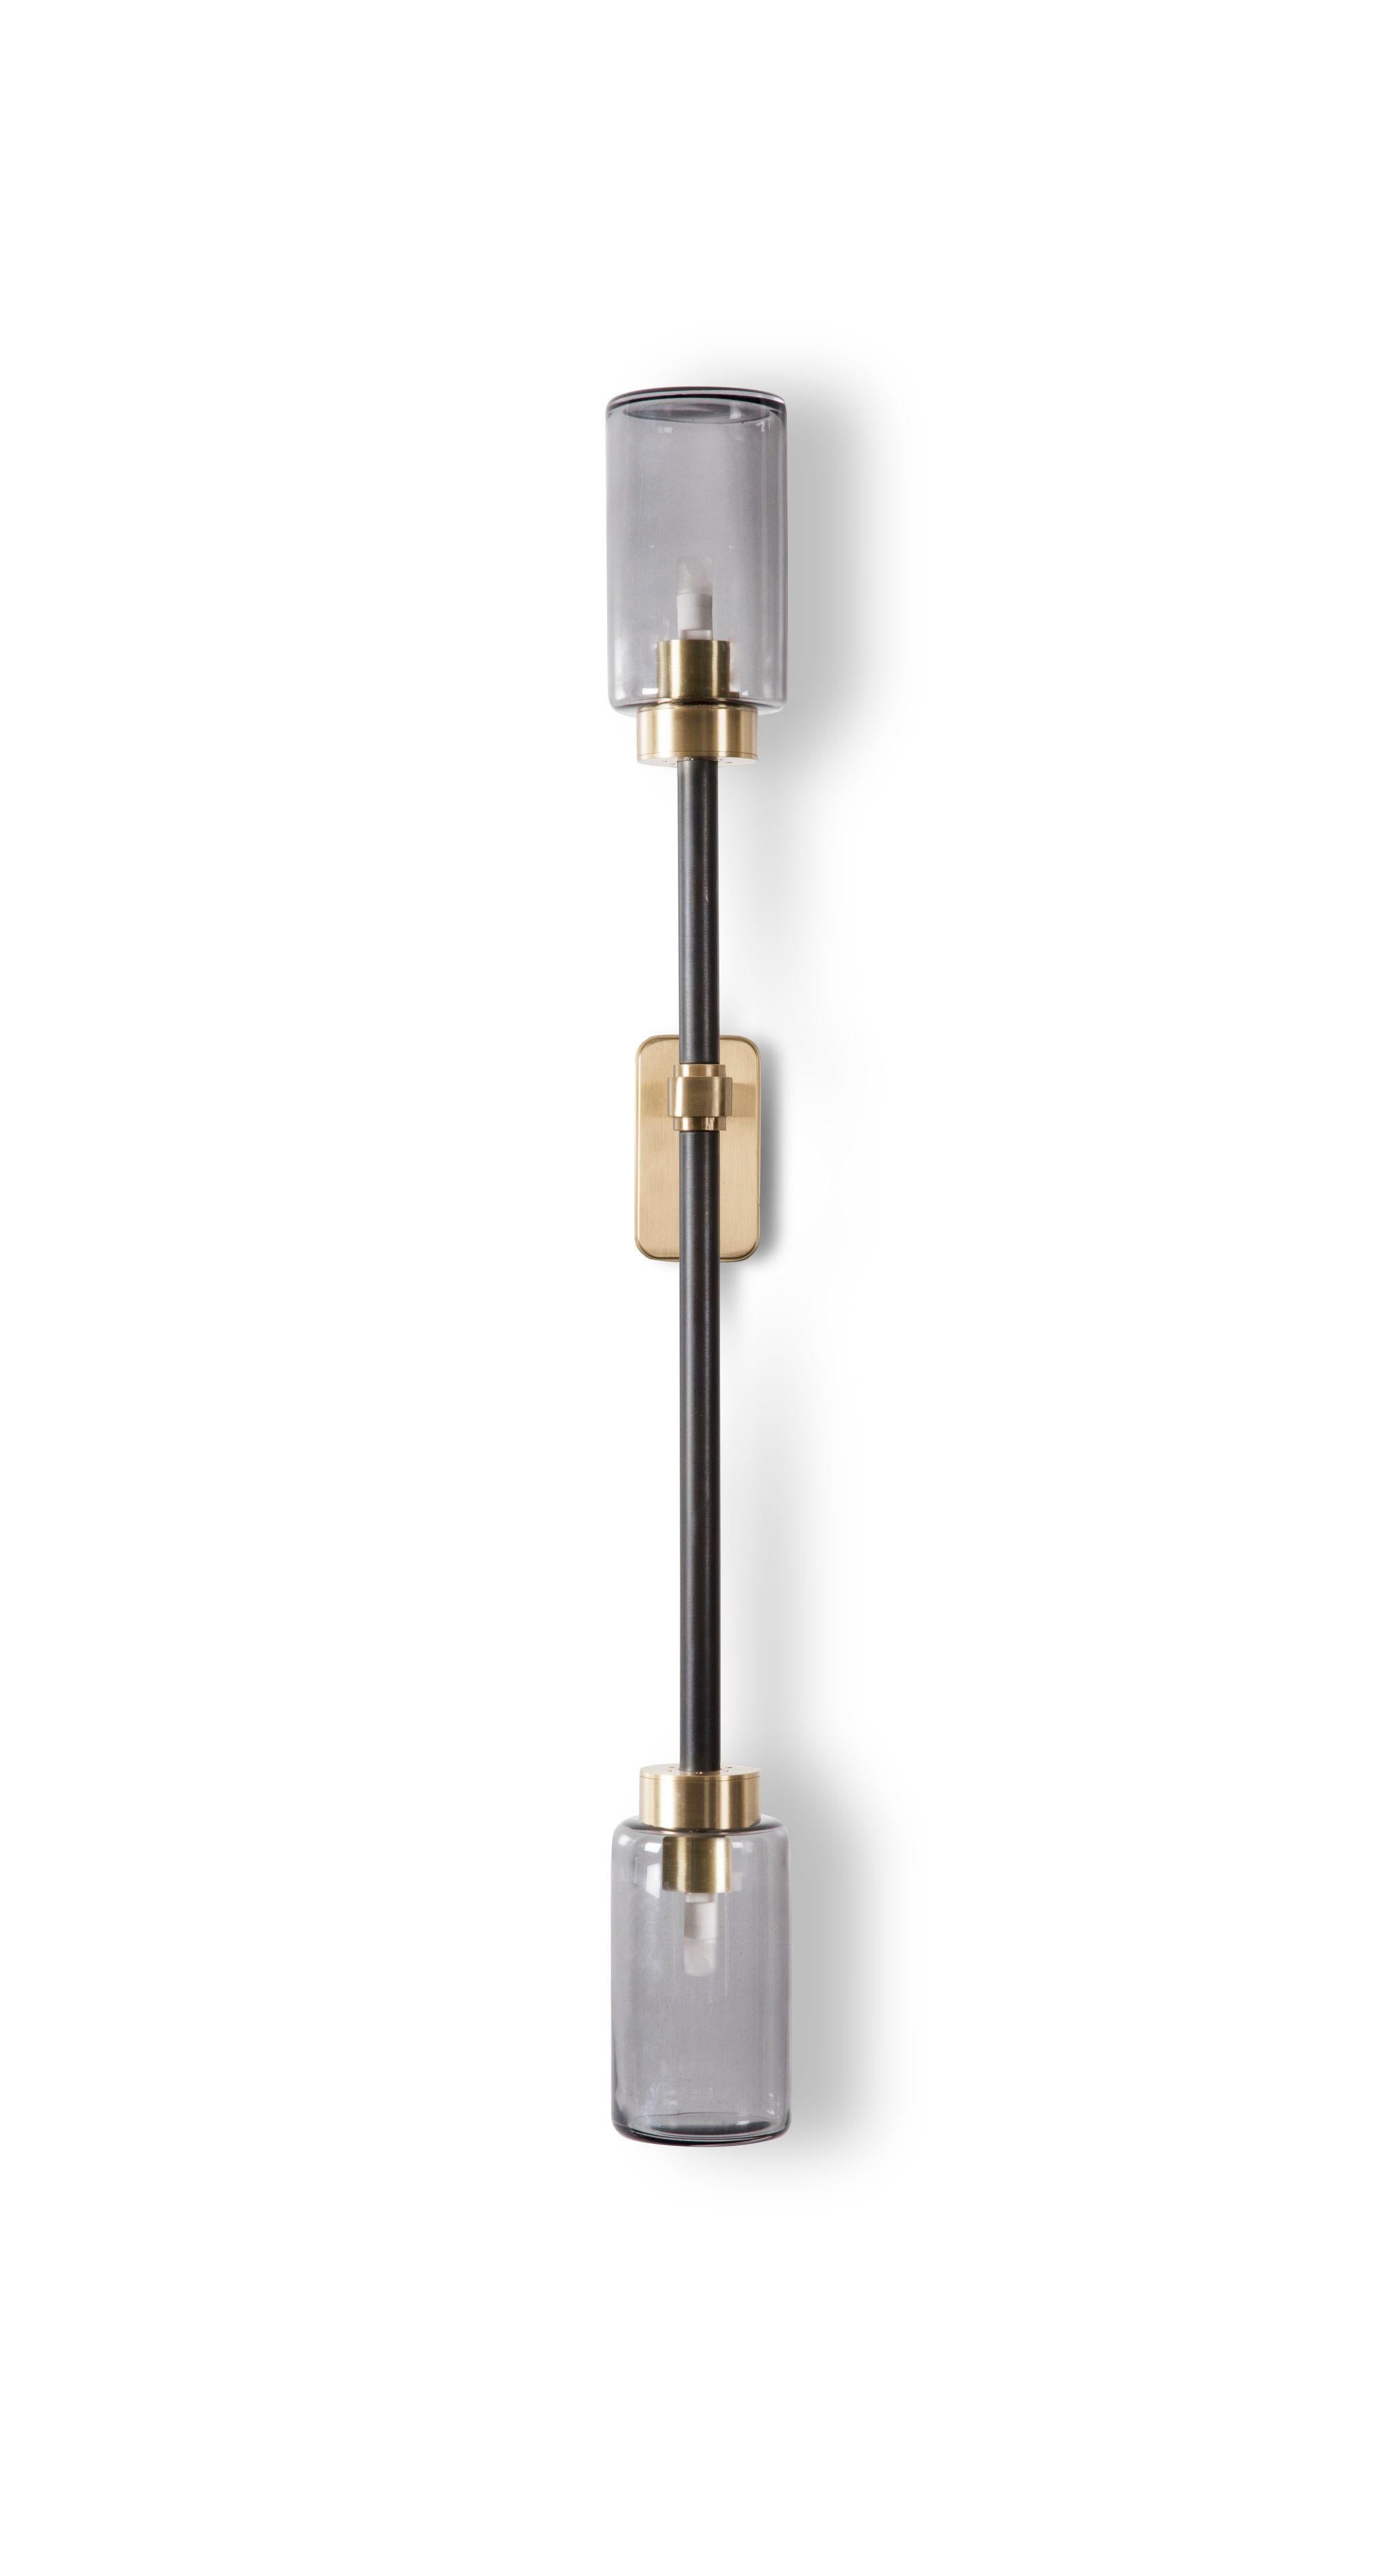 Smoked farol single wall light by Bert Frank
Dimensions: H 66 x W 10.5 x D 7 cm
Materials: Brass, bronze

Available finishes: Bronzed brass, black brass
All our lamps can be wired according to each country. If sold to the USA it will be wired